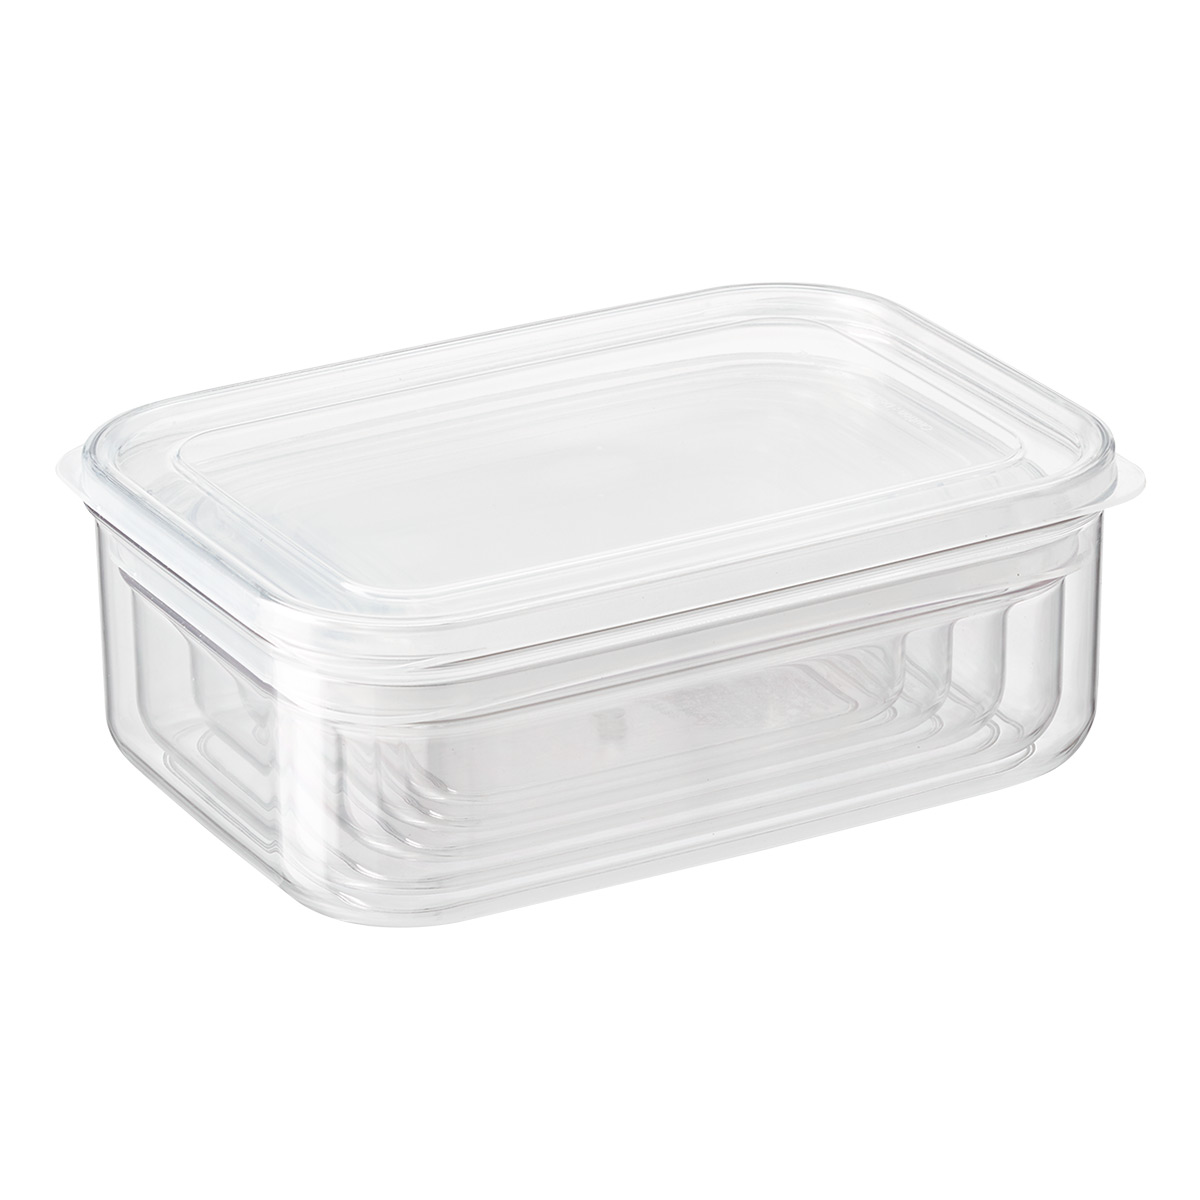 https://www.containerstore.com/catalogimages/351403/10076057-lustroware-crystal-clear-ne.jpg